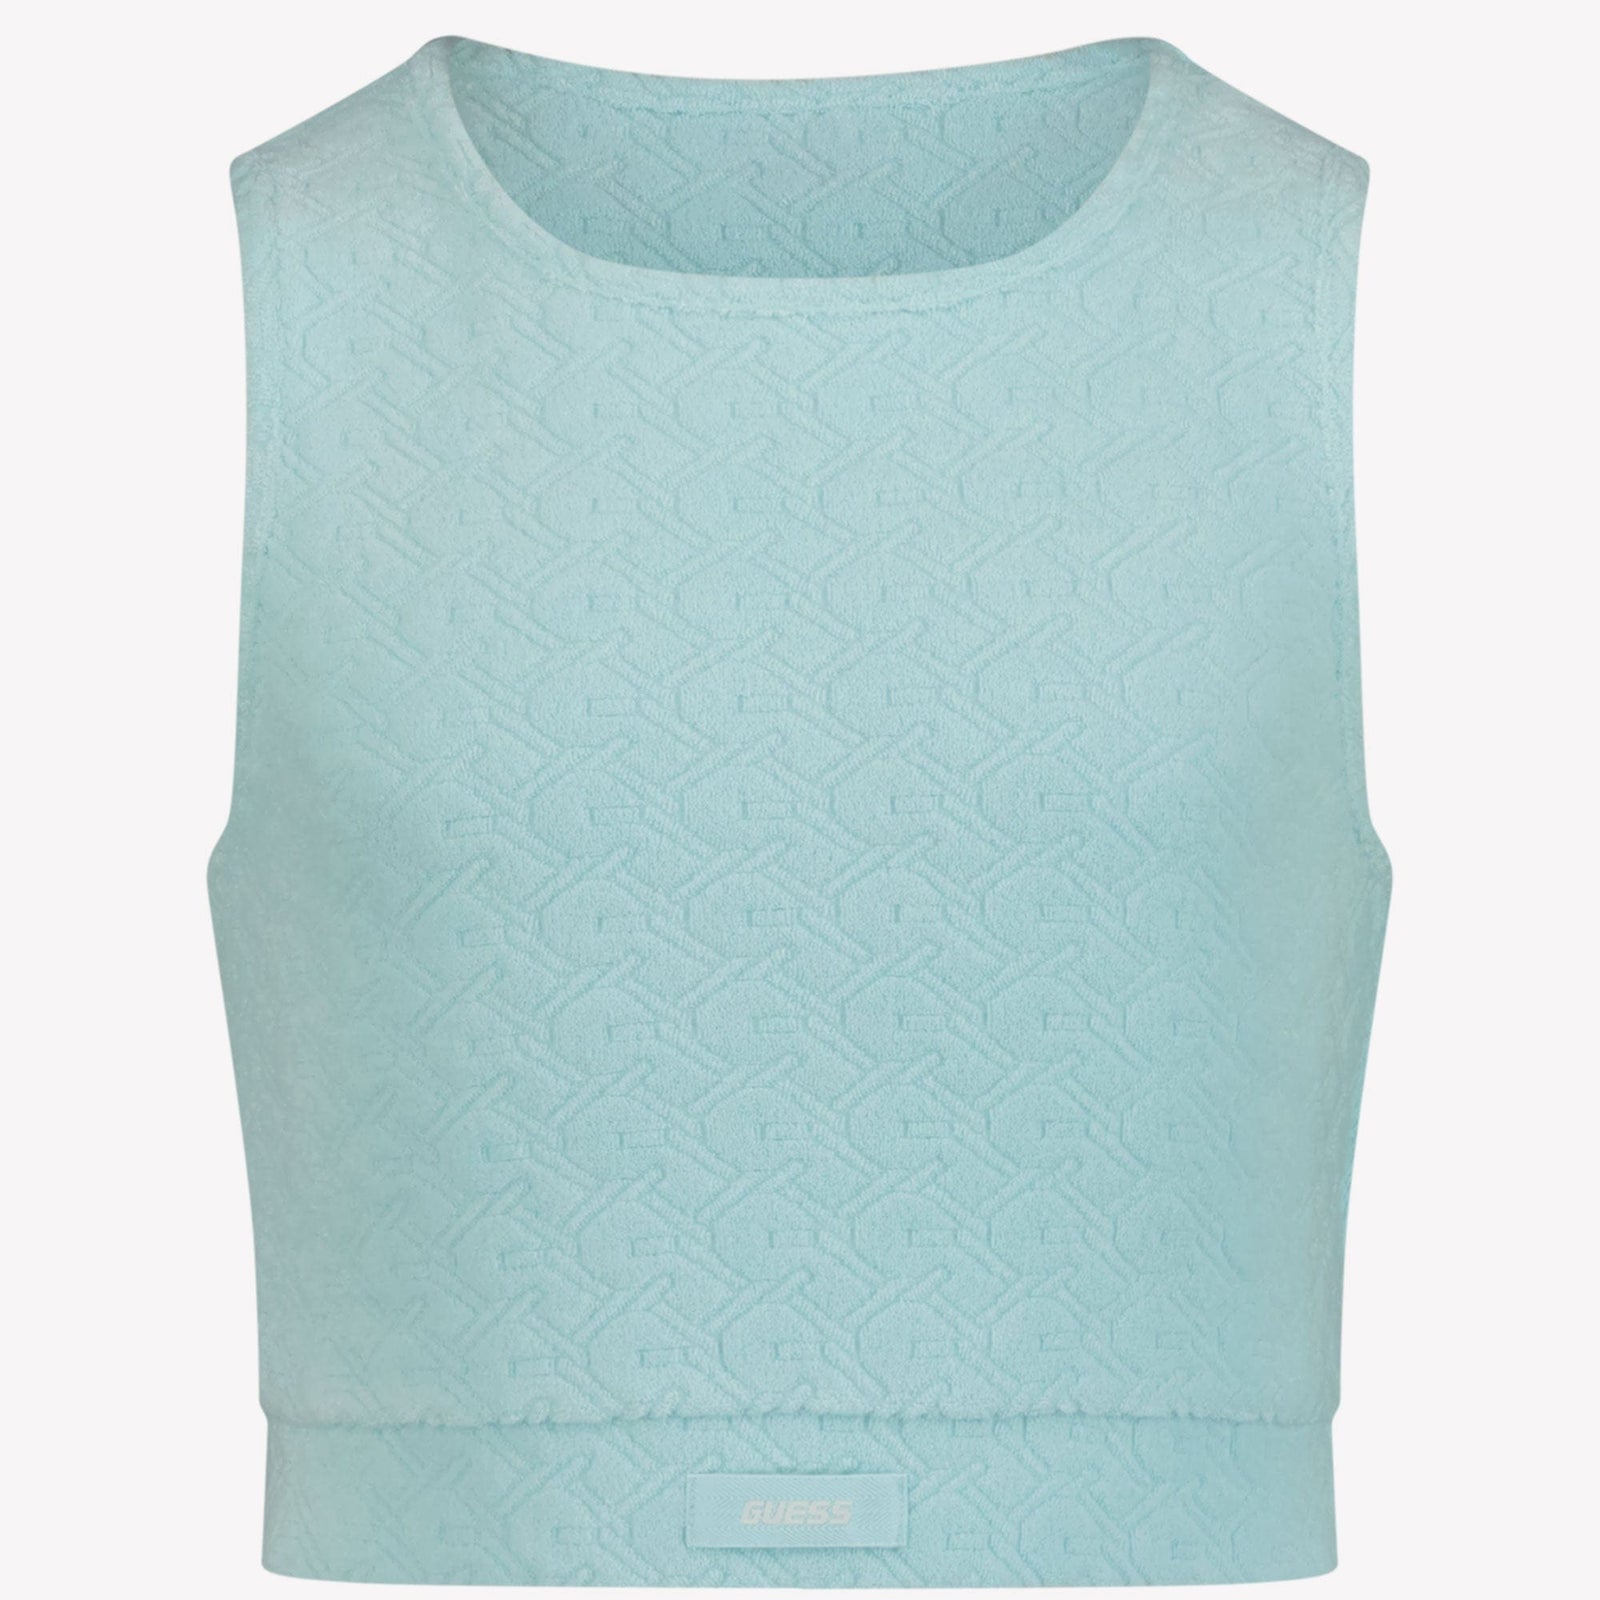 Guess Kinder Meisjes T-Shirt Turquoise 8Y